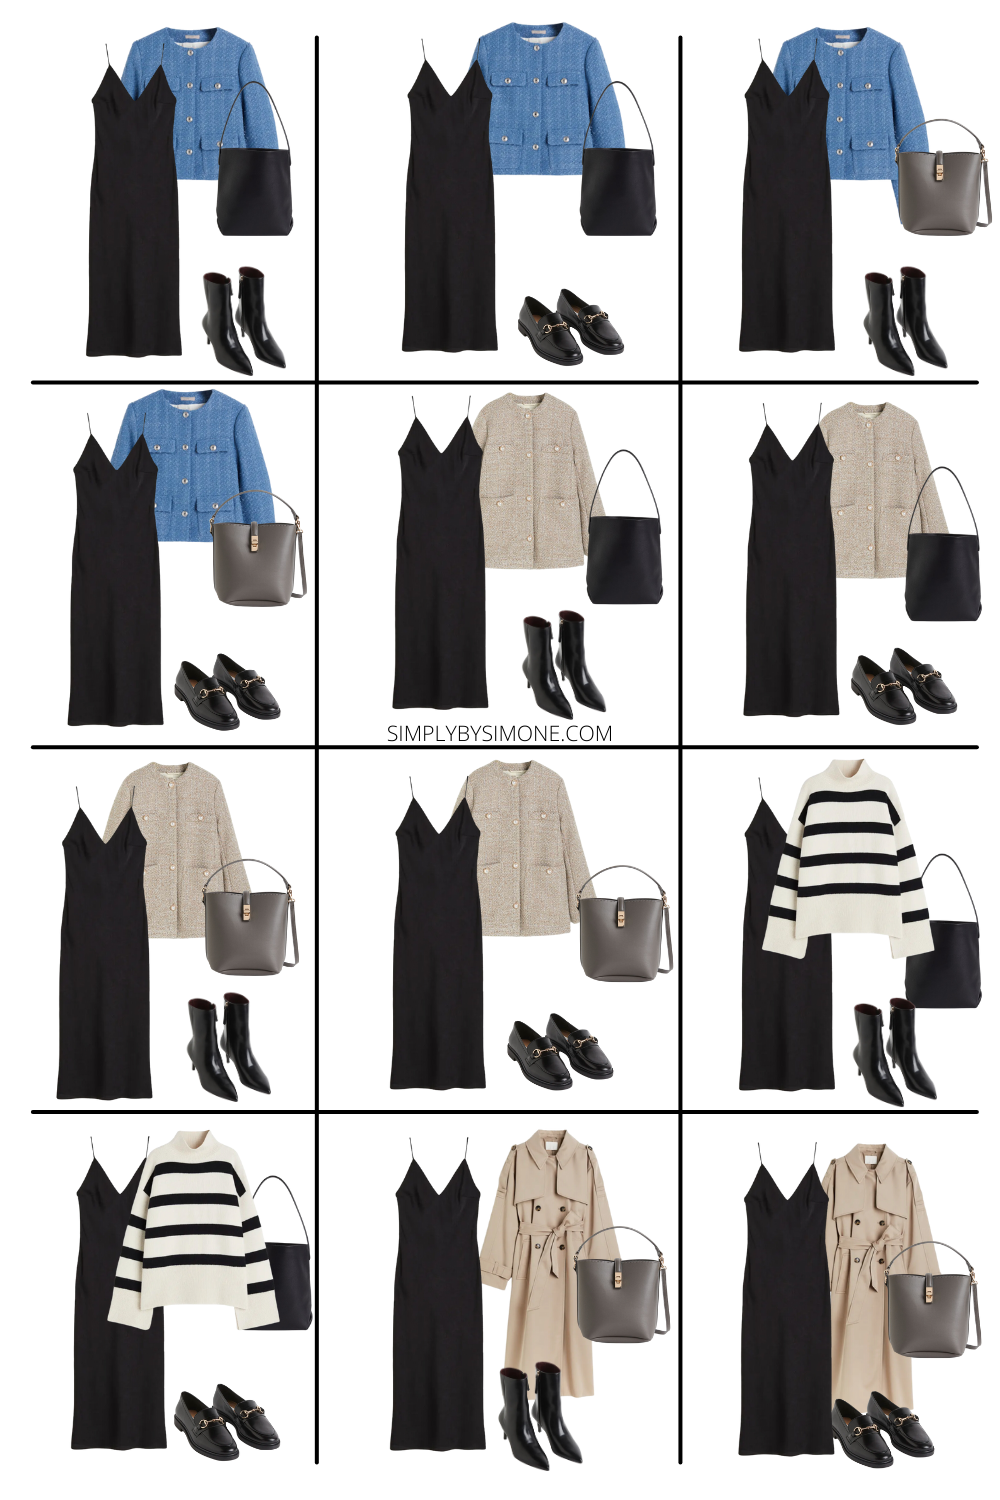 Affordable H&M Fall Capsule Wardrobe | 15 Pieces, 48 Outfits | How to Build a Capsule Wardrobe | H&M Fall Clothes | Outfit Inspiration | 48 Fall Weather Outfit Ideas | Fall Vacation Packing Guide | H&M Fall Capsule Wardrobe - What To Wear This Fall 2023, Parisian Outfit Ideas | Looks 37-48 | Simply by Simone